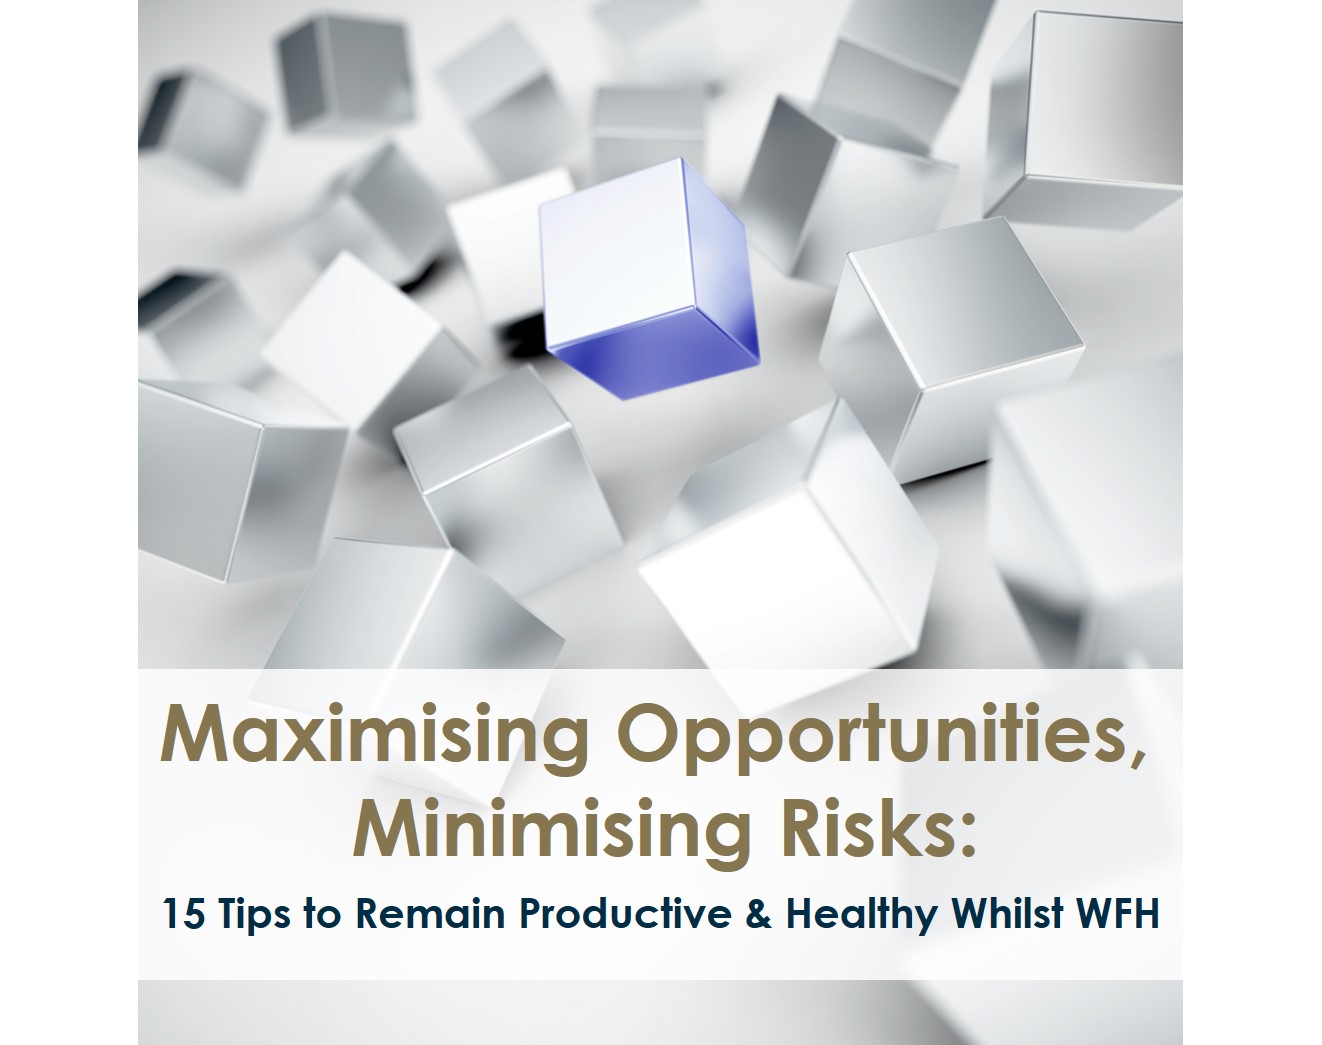 Maximising Opportunities, Minimising Risks: 15 Tips to Remain Productive & Healthy Whilst WFH